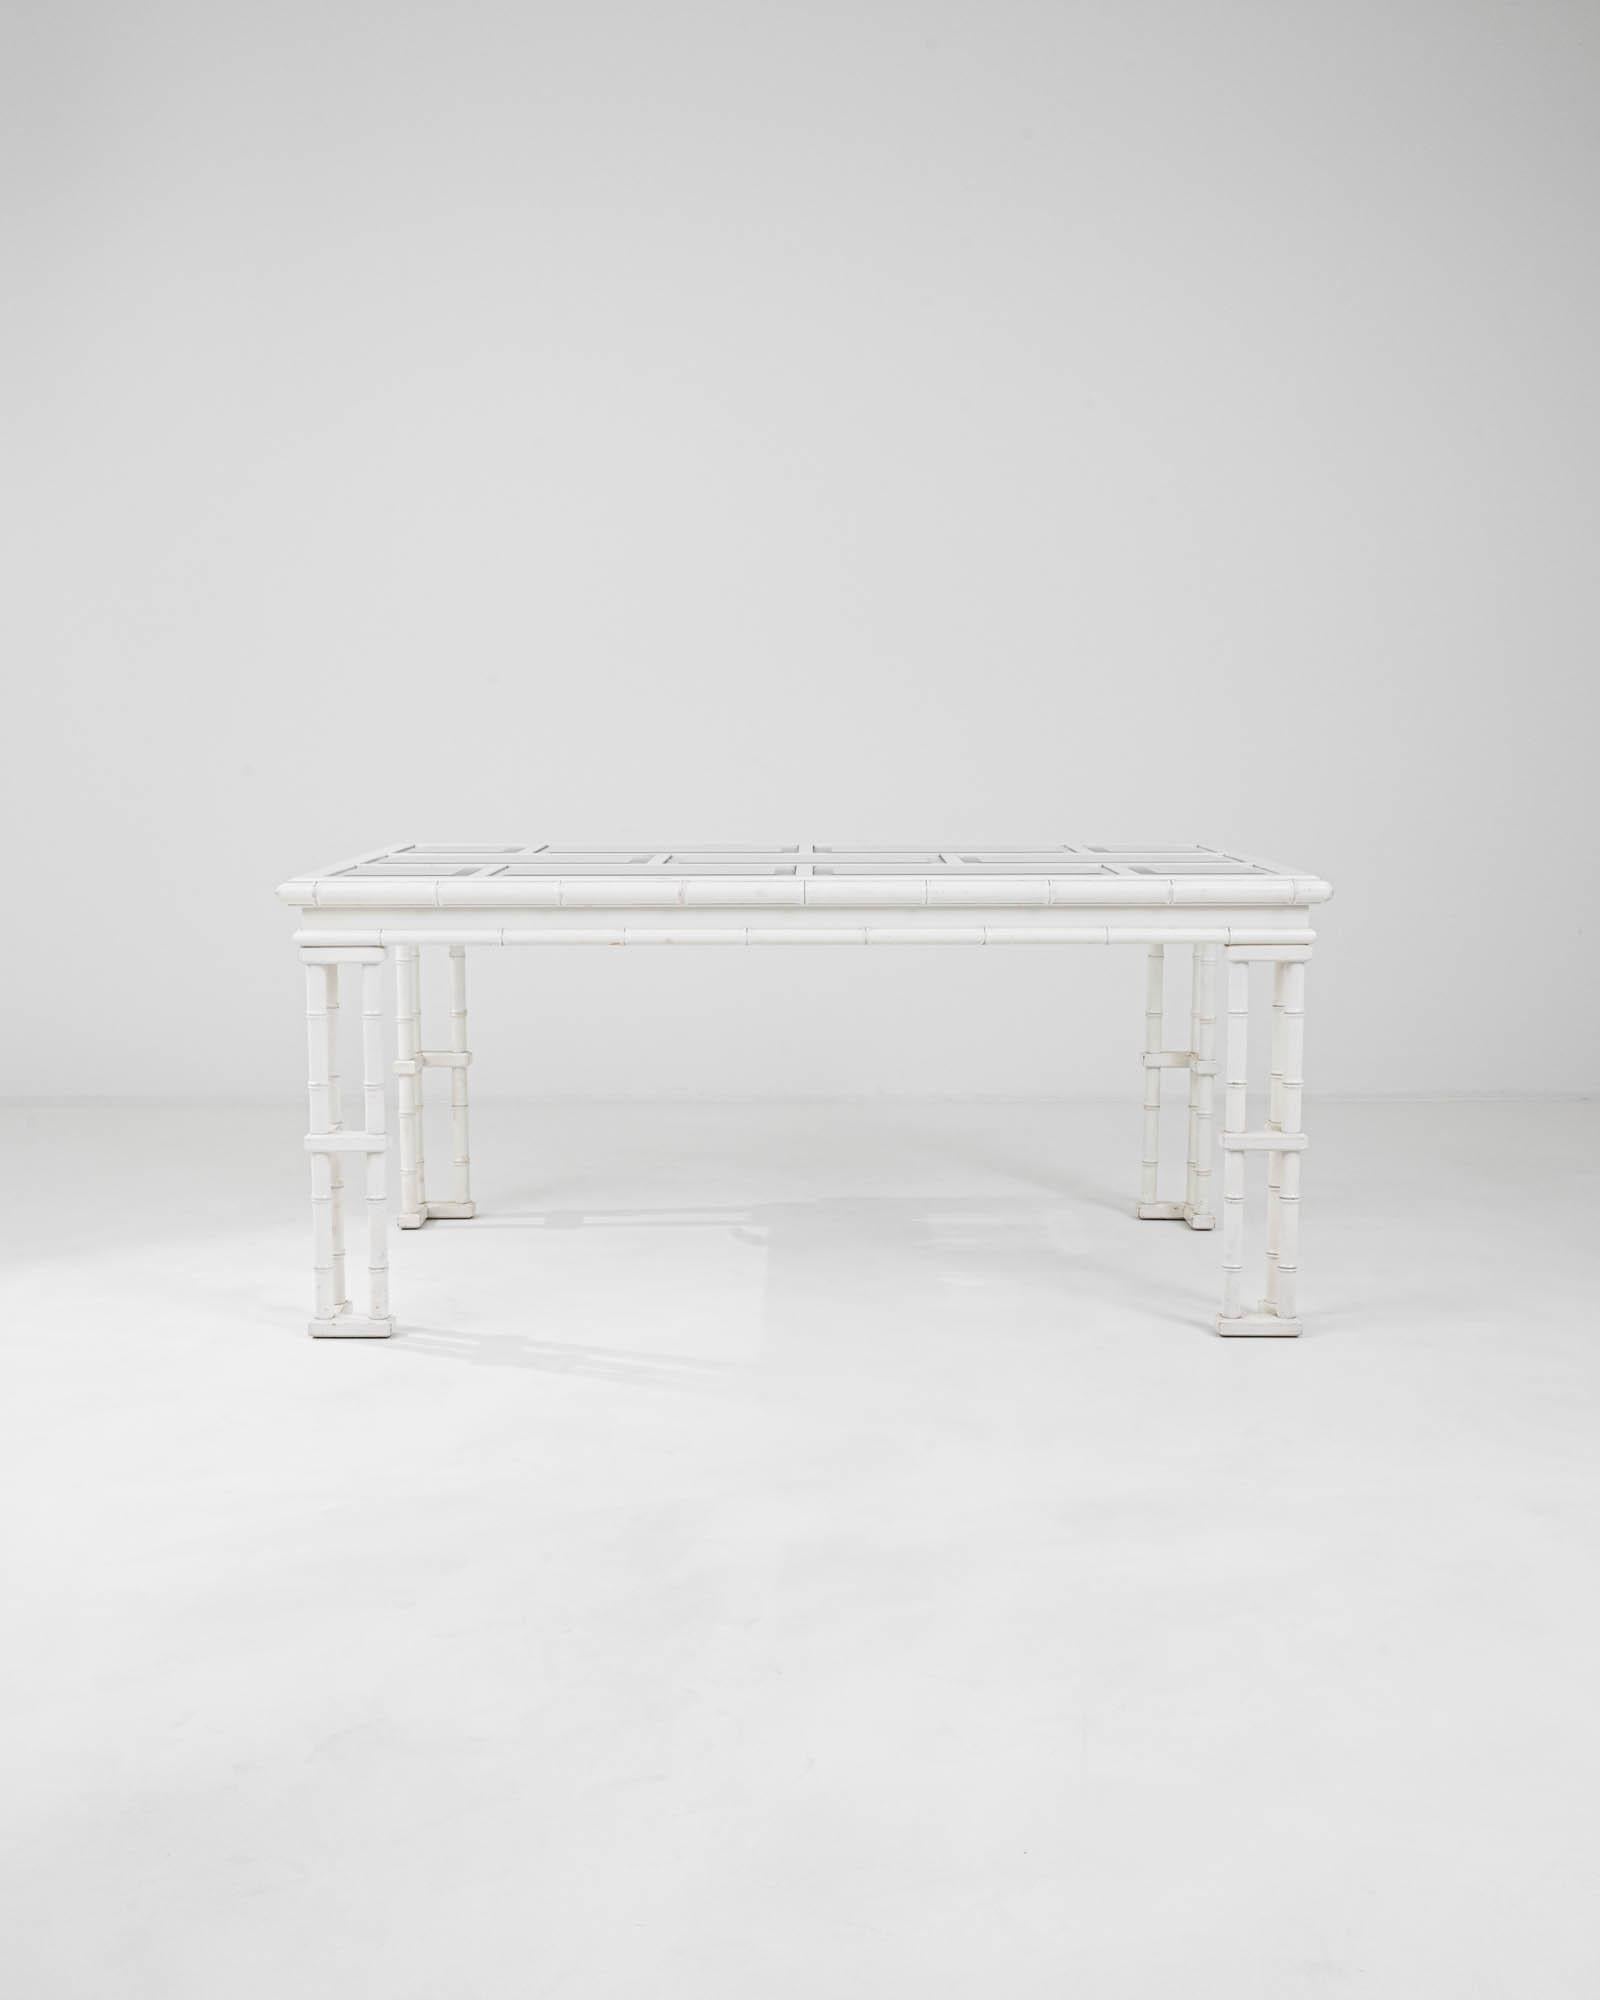 Immerse yourself in the allure of this 20th Century French Wooden Dining Table, a paragon of chic sophistication. Its white-painted bamboo-style frame provides a fresh and airy feel, perfect for brightening up any dining space. The table's glass top